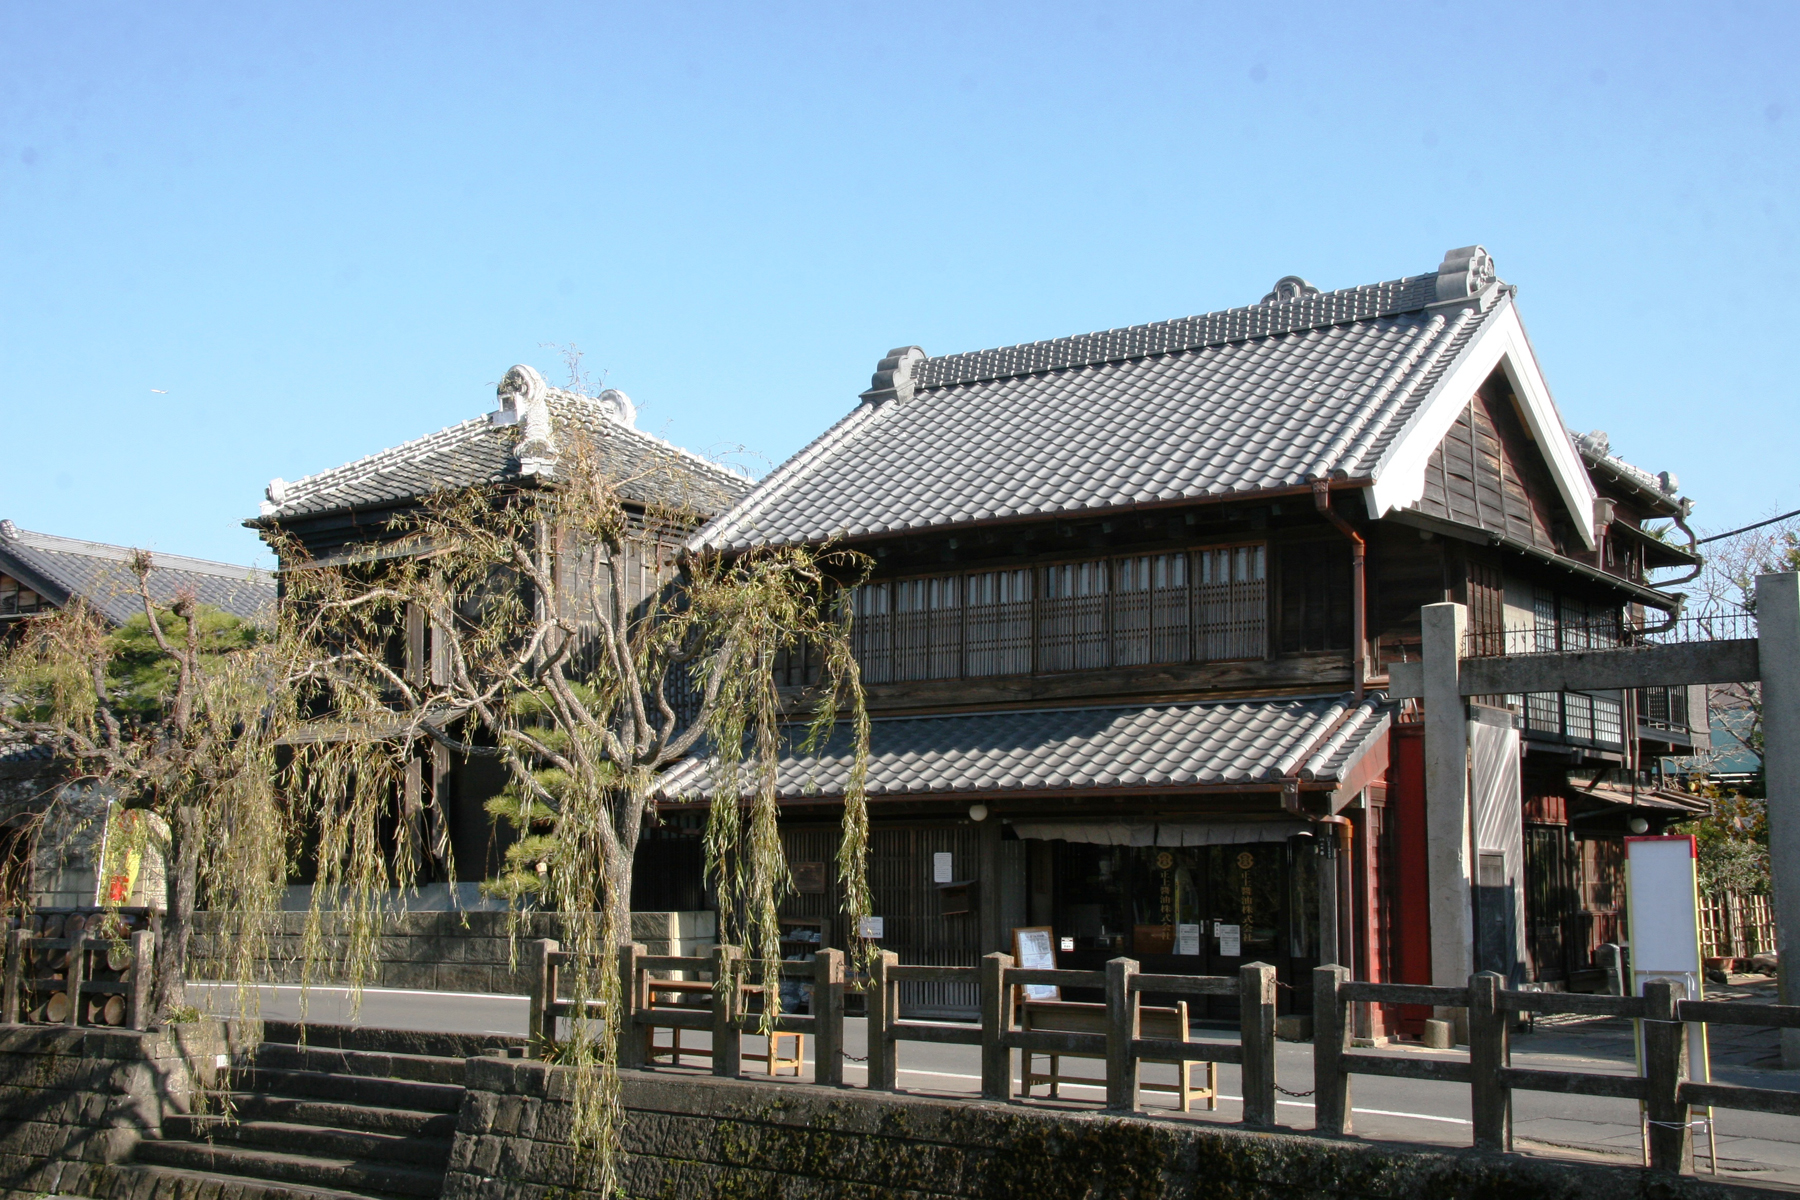 Sawara (Japan, 2010 Watch): Funding from American Express supported the restoration of seven historic machiya in Sawara that were damaged by the 2011 earthquake.